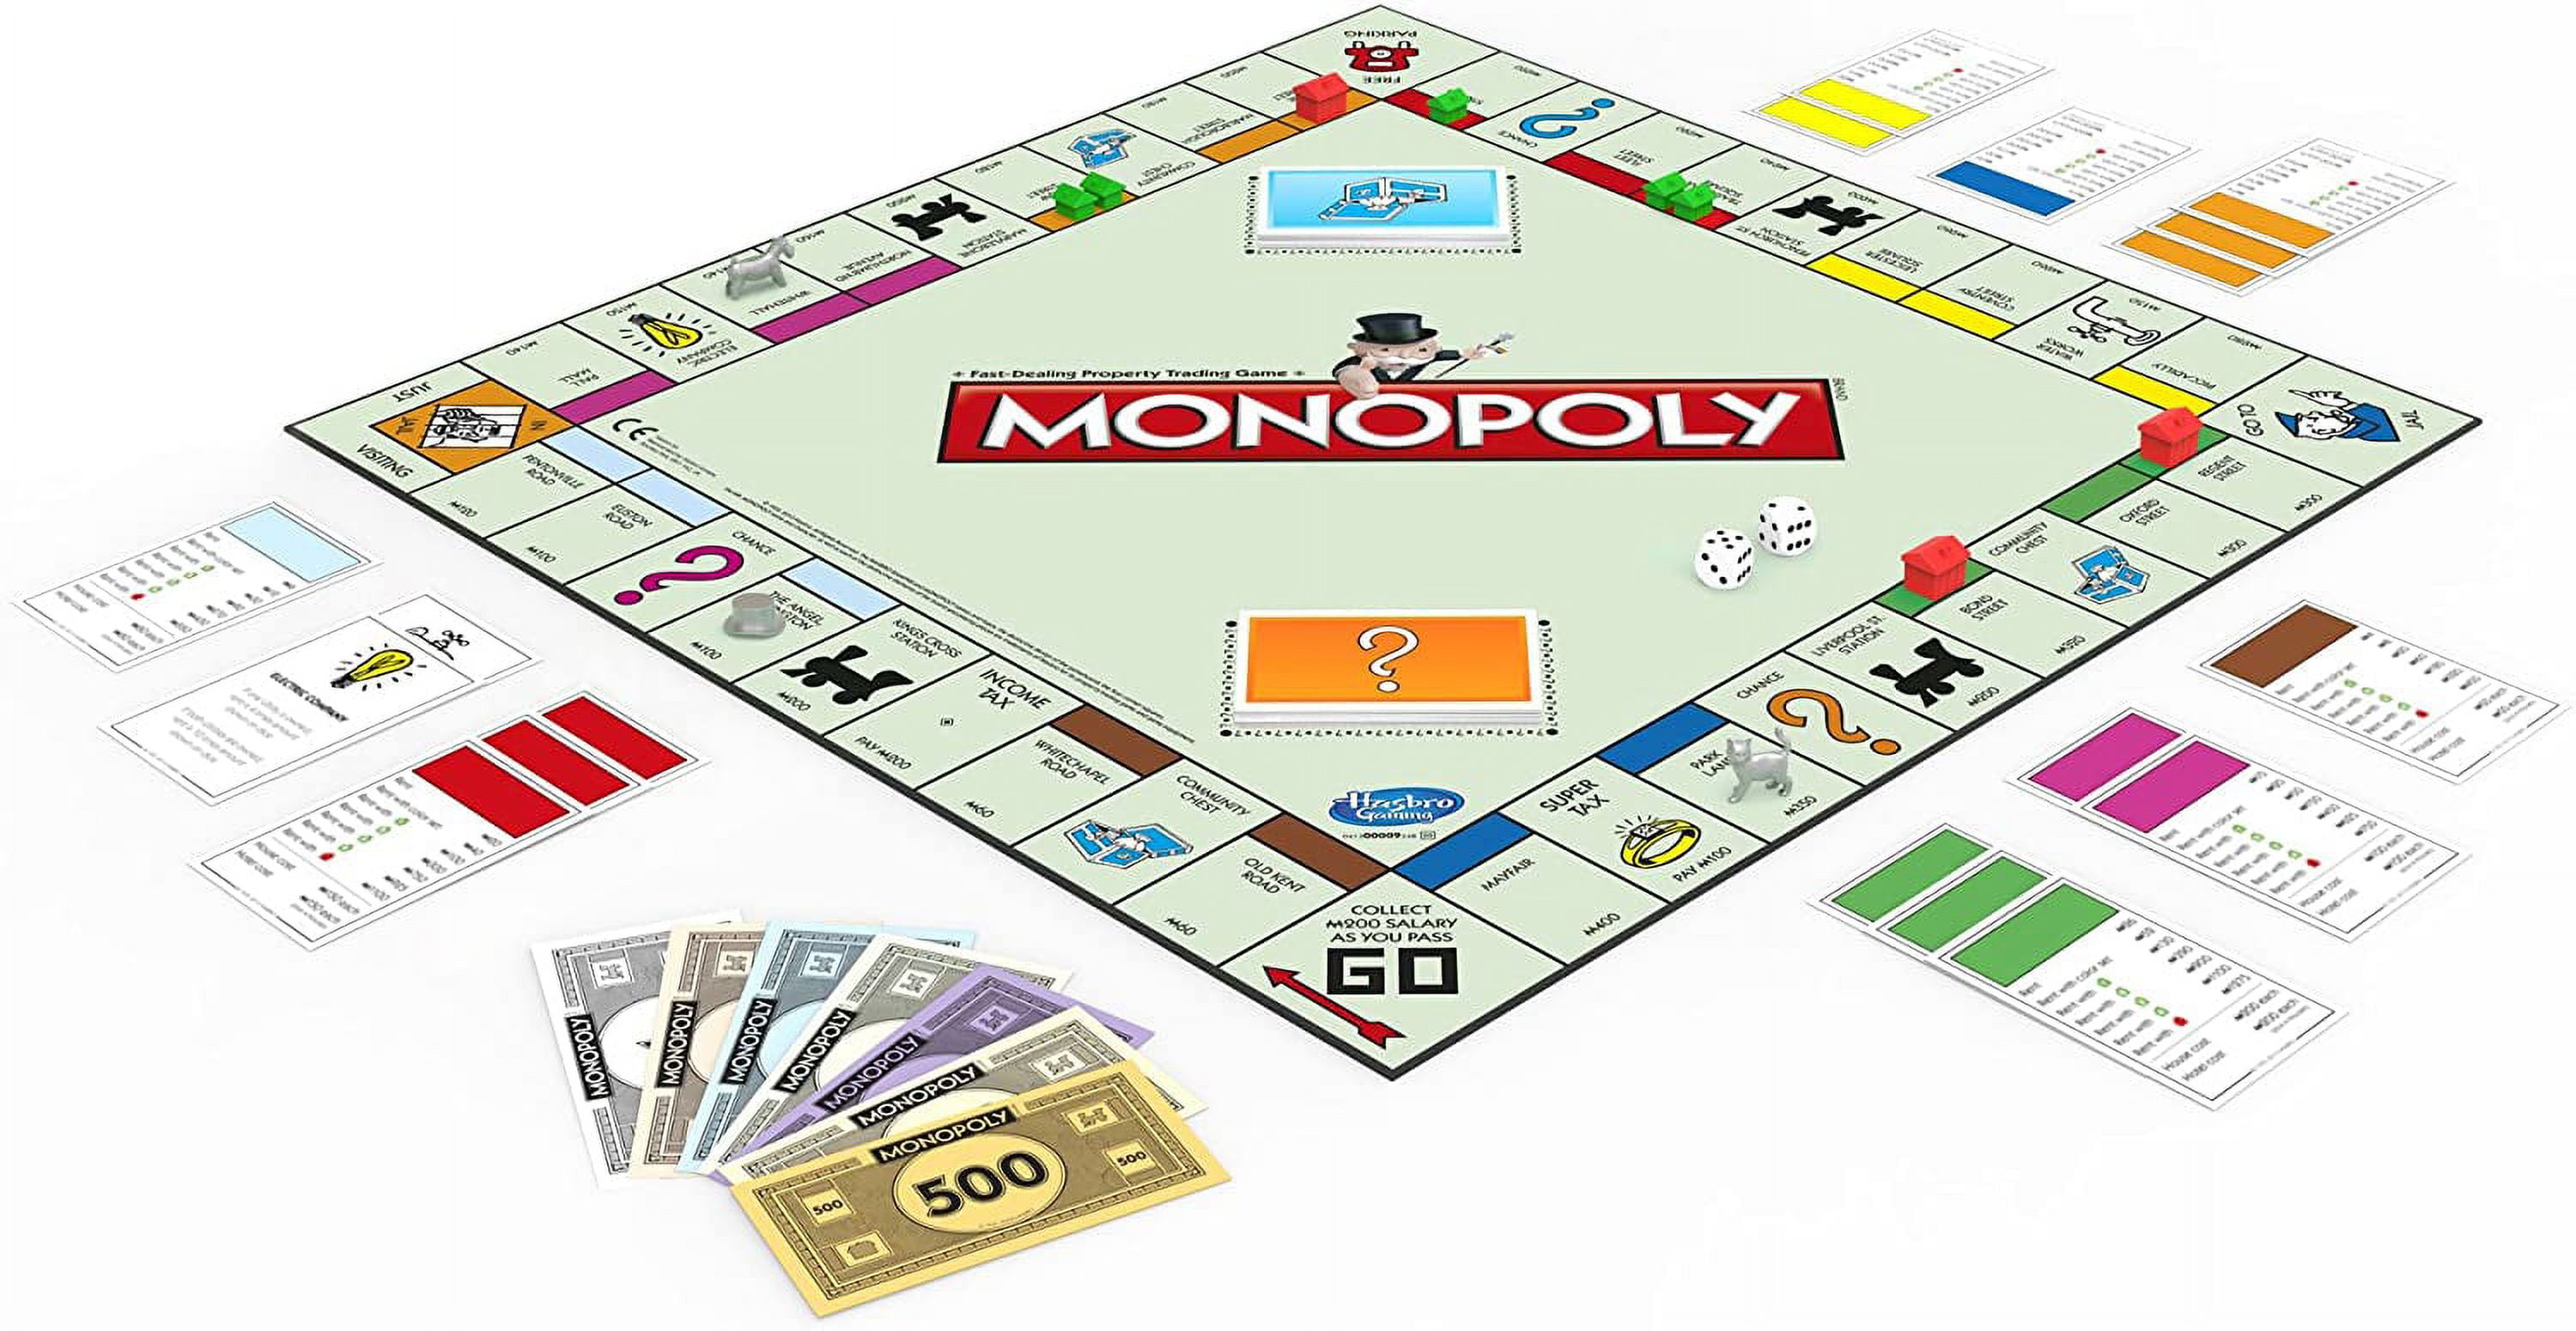 Monopoly world edition • Compare & see prices now »